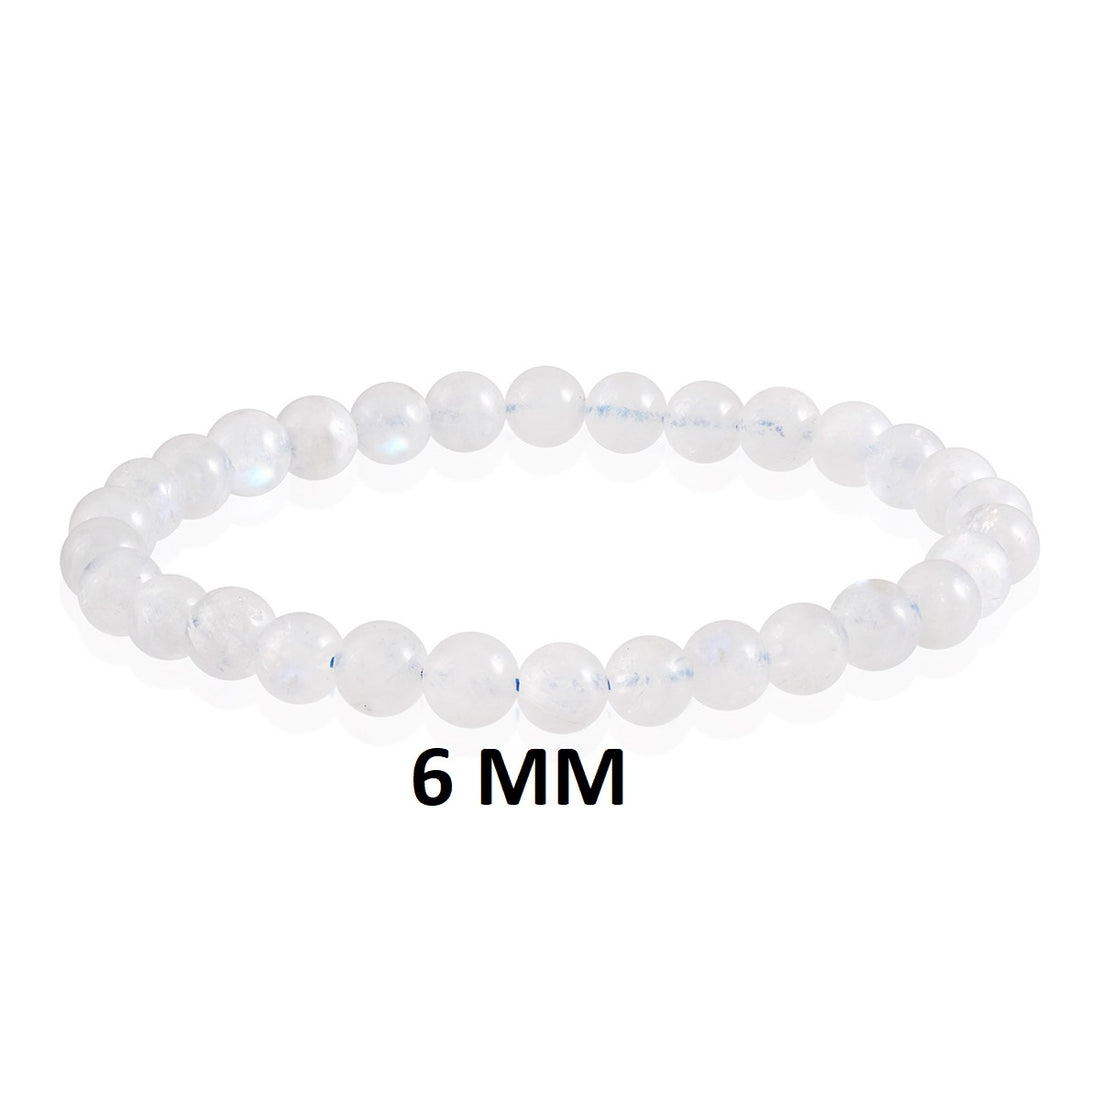 Visual representation of new beginnings associated with the Rainbow Moonstone Stretch Bracelet, radiating positive energy during transitional phases